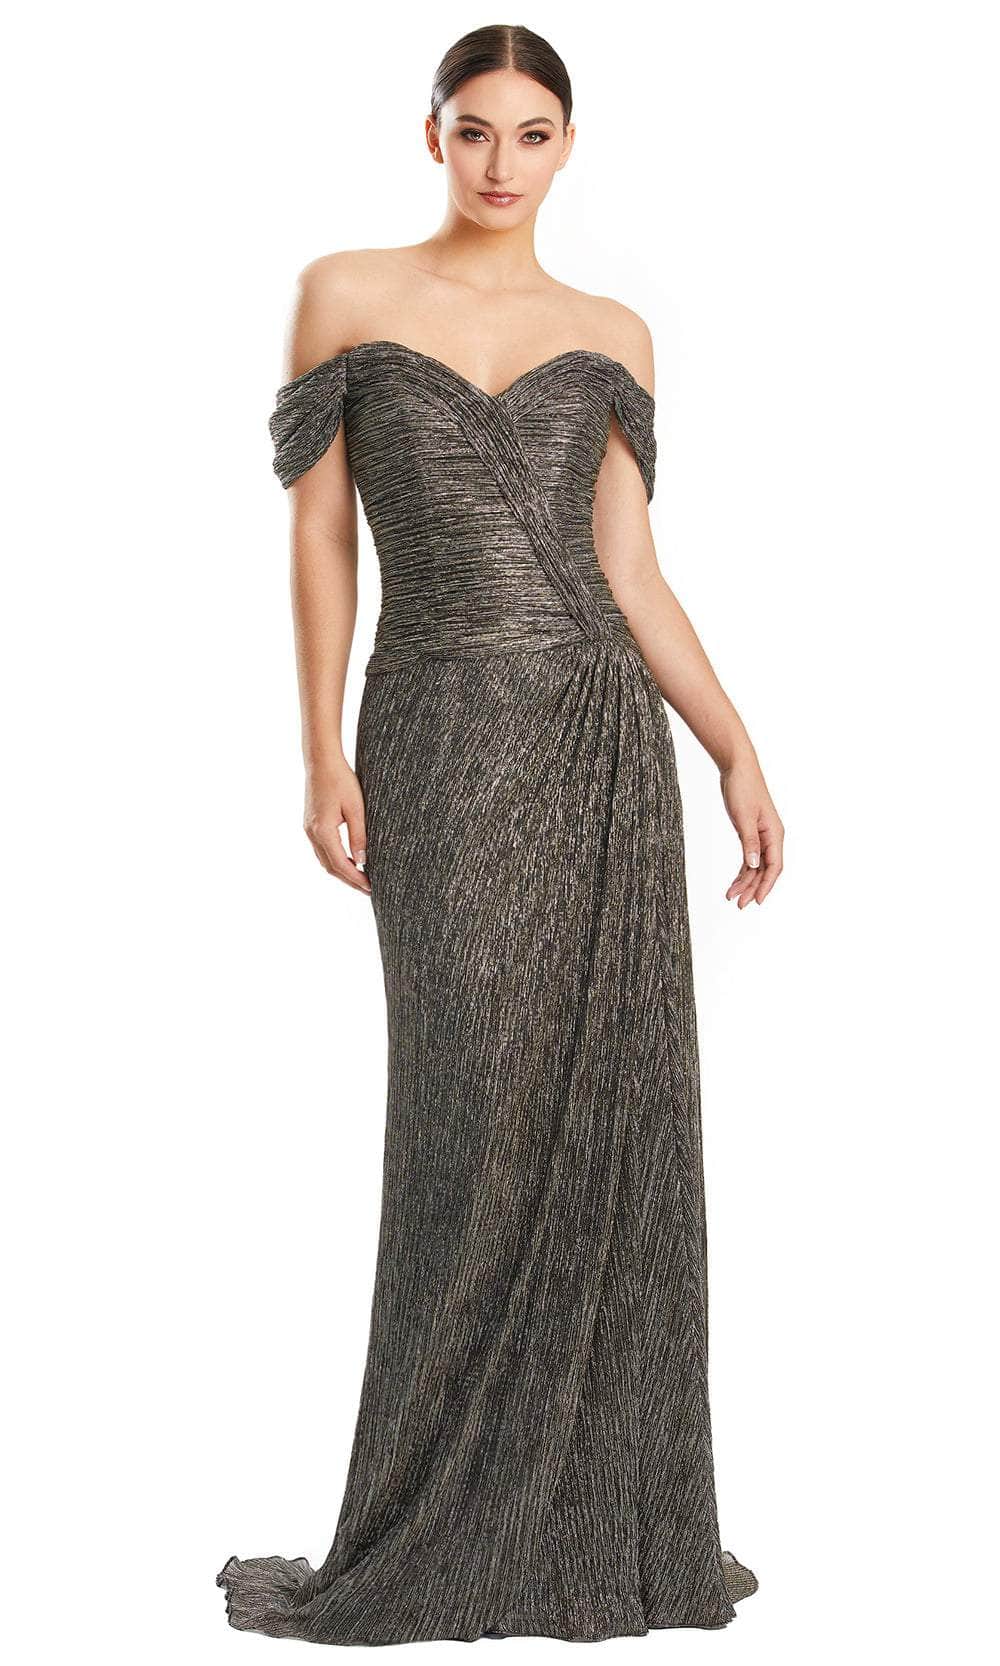 Alexander by Daymor 1858F23 - Off-Shoulder Ruched Prom Dress Special Occasion Dress 00 / Bronze